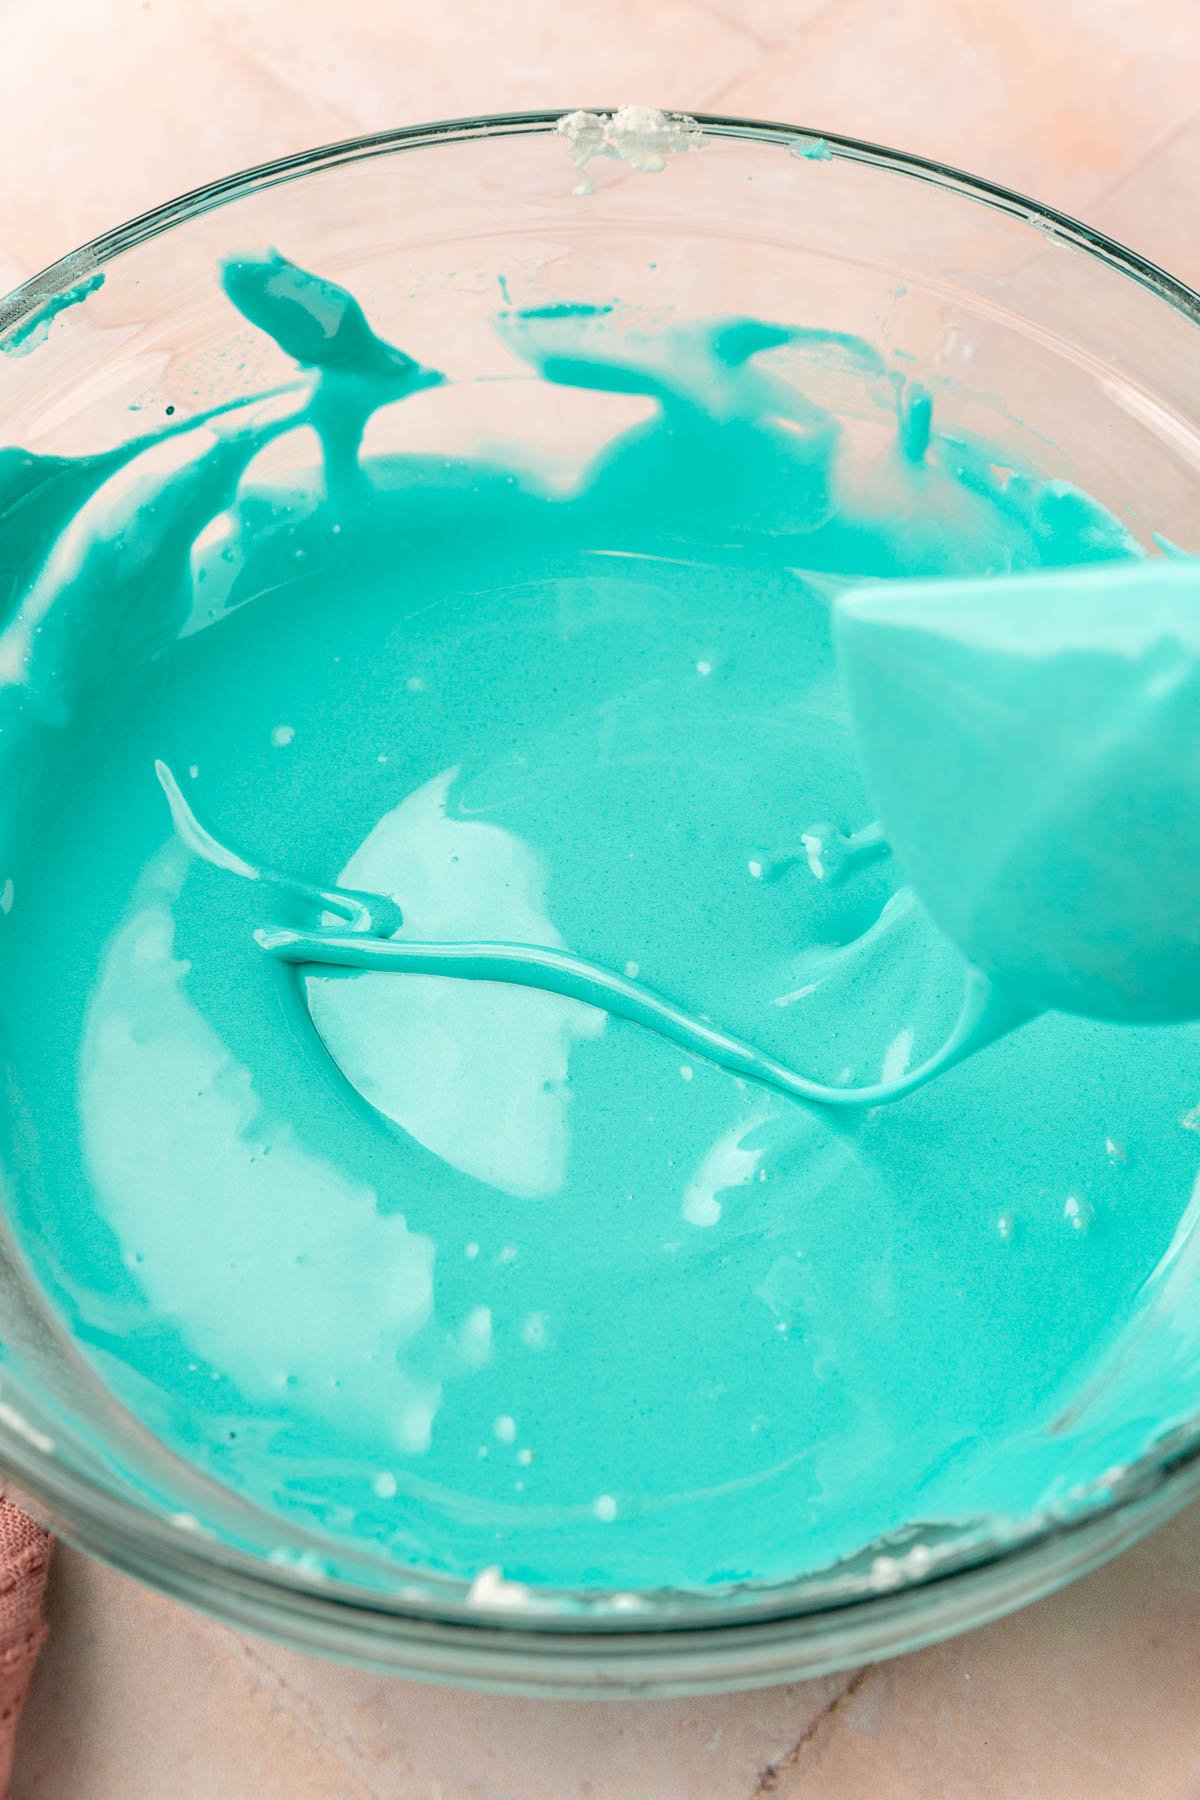 A glass mixing bowl of teal royal icing with a spatula illustrating the ribbon test for royal icing thickness.